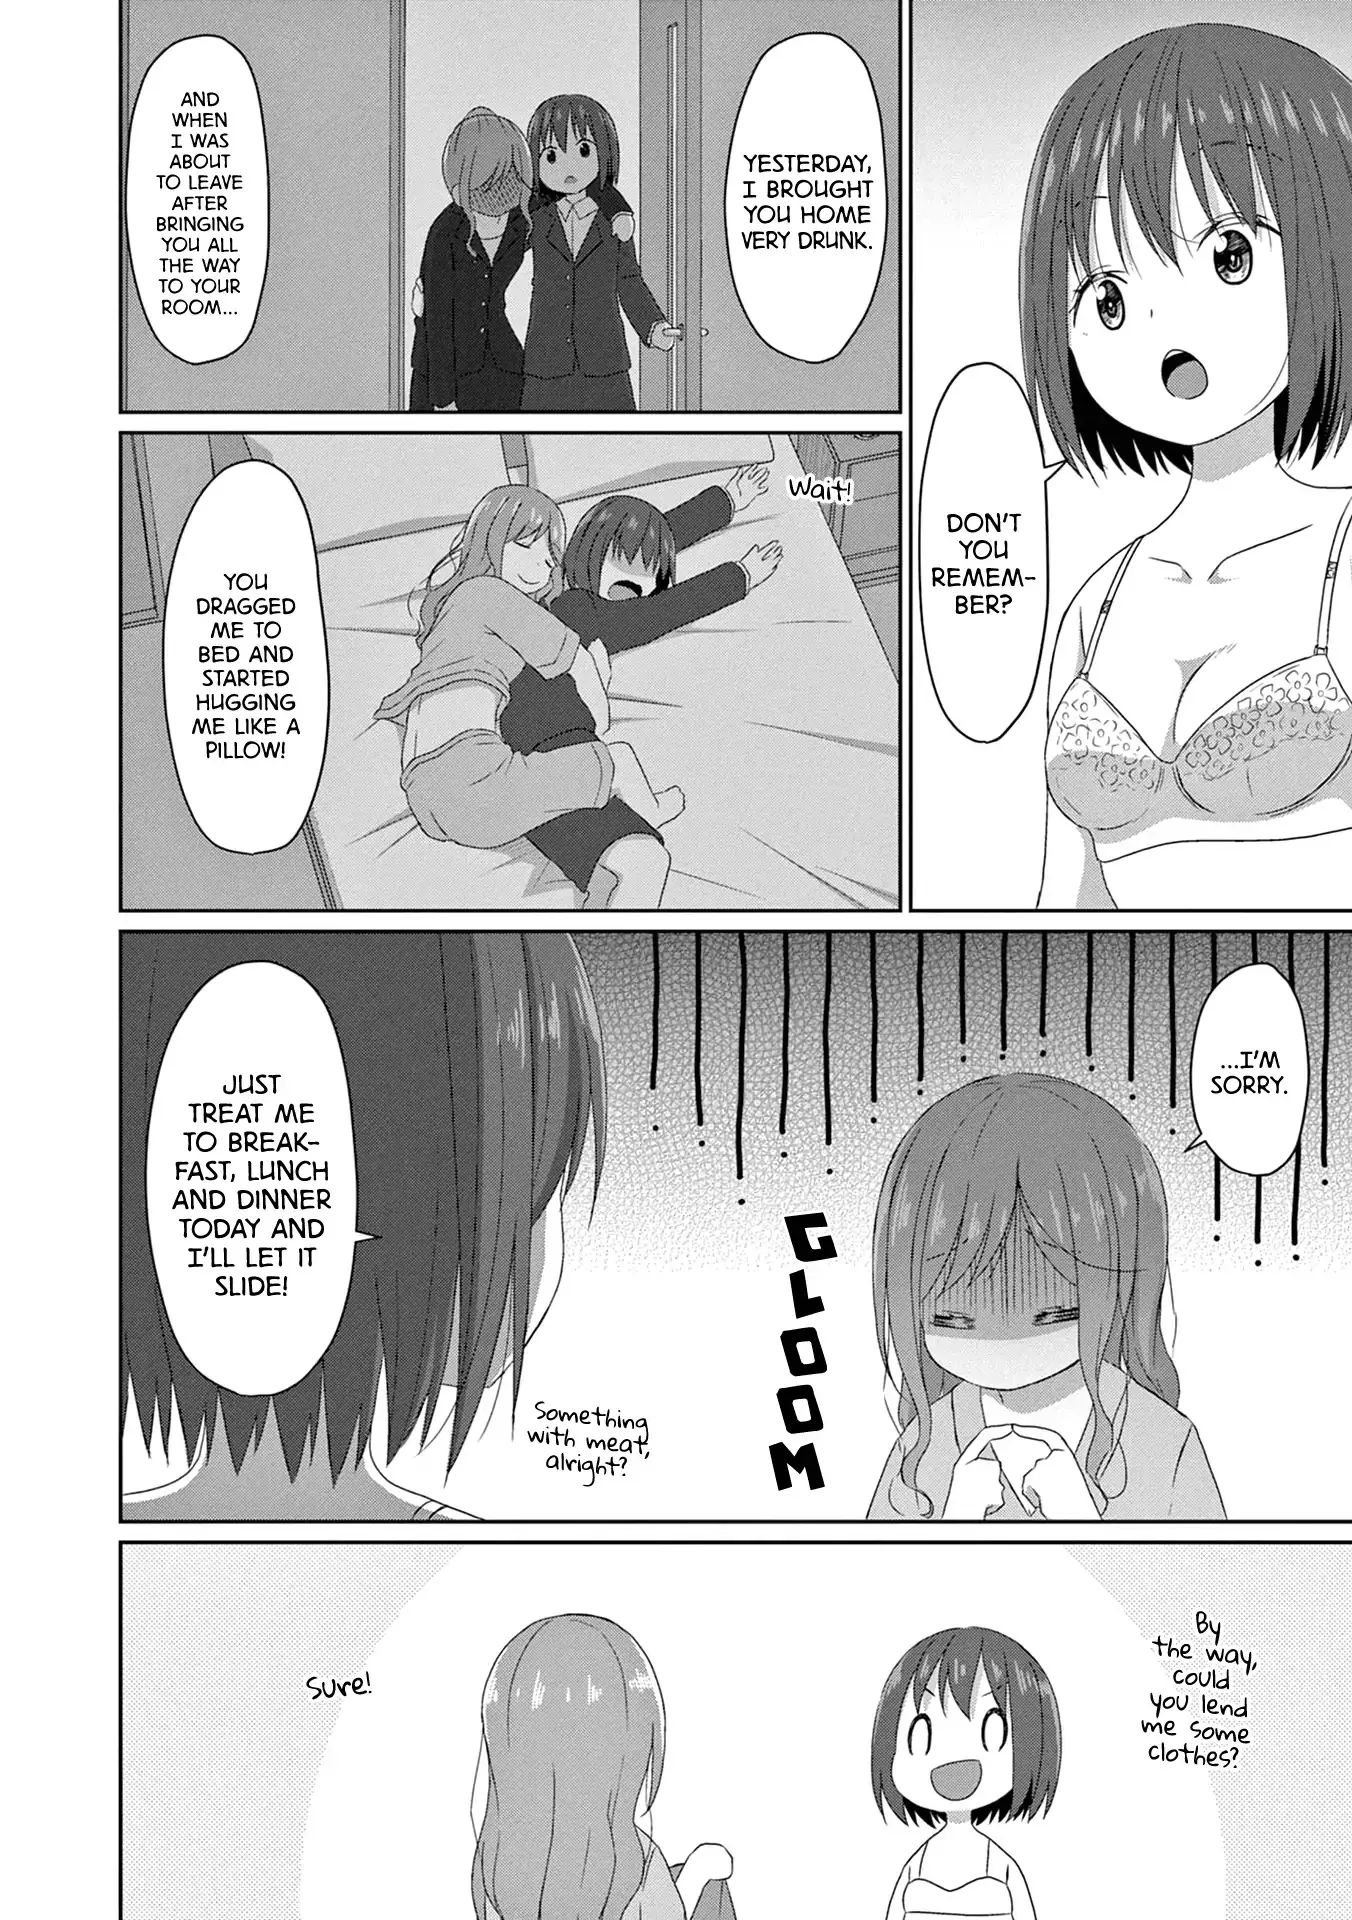 Js-San To Ol-Chan - 12 page 4-16229ae8